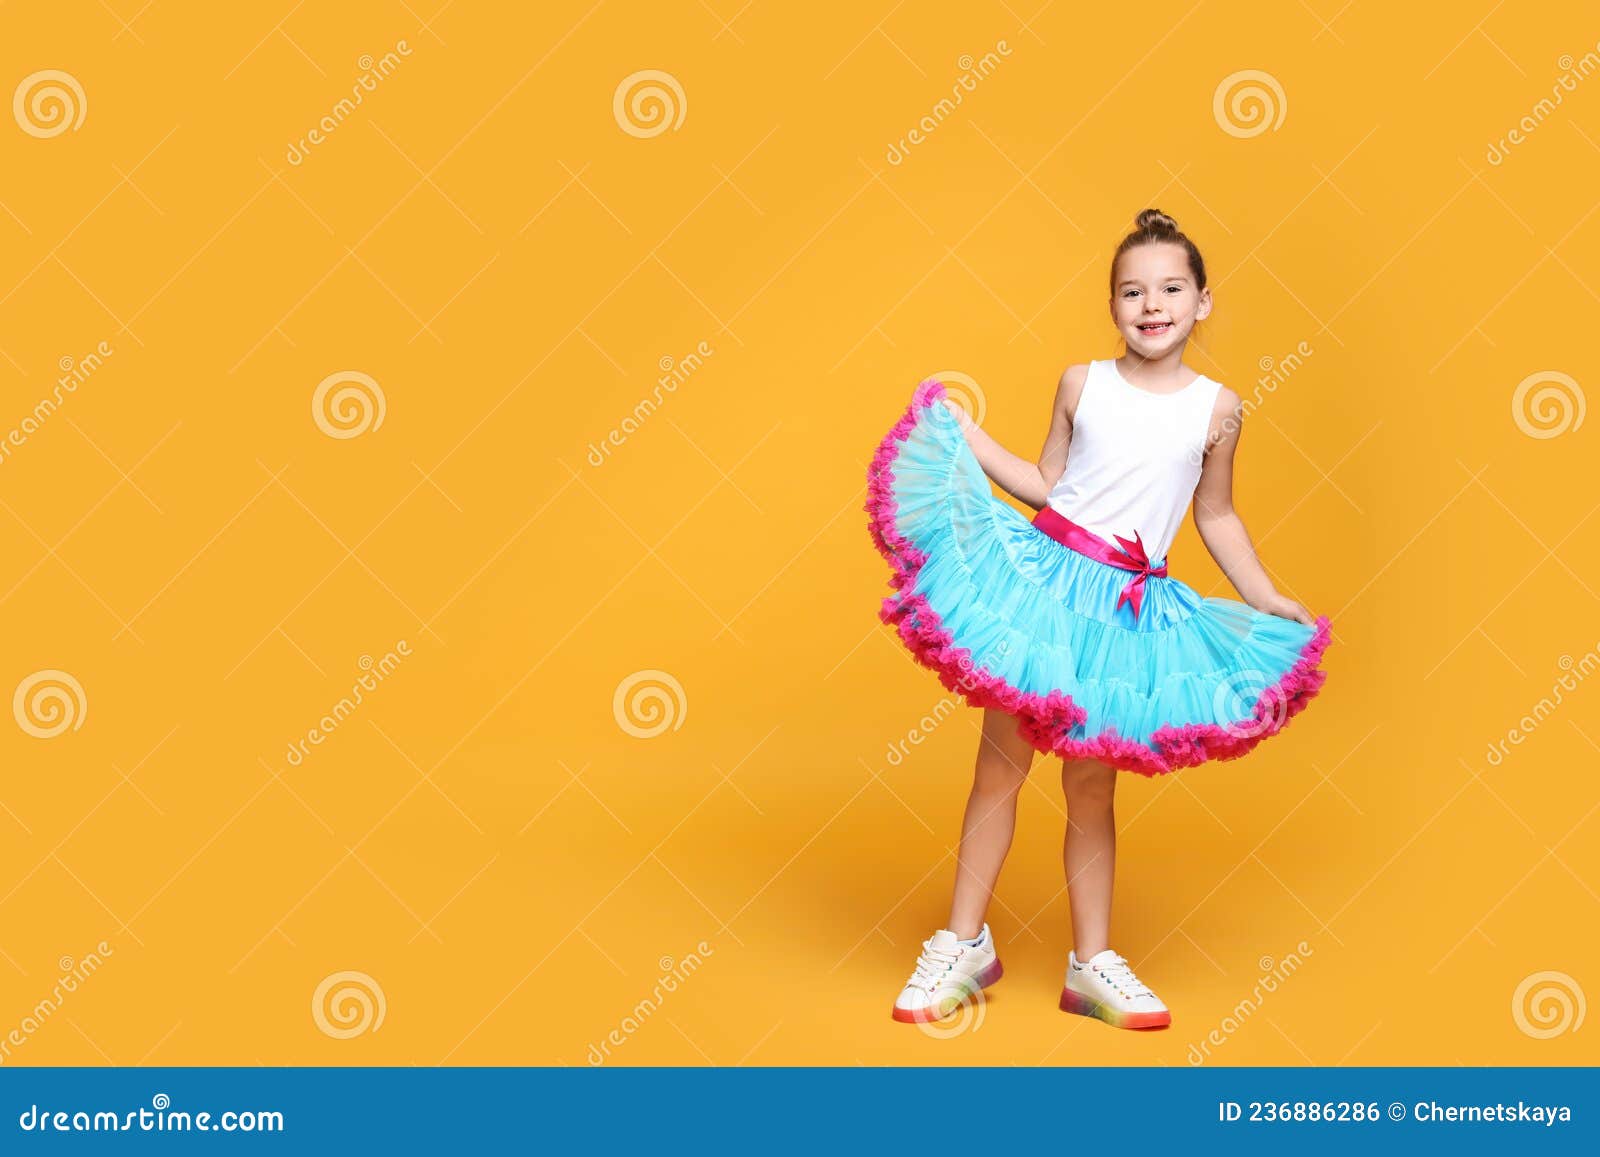 9. Little girl with blond hair and a tutu dancing - wide 9